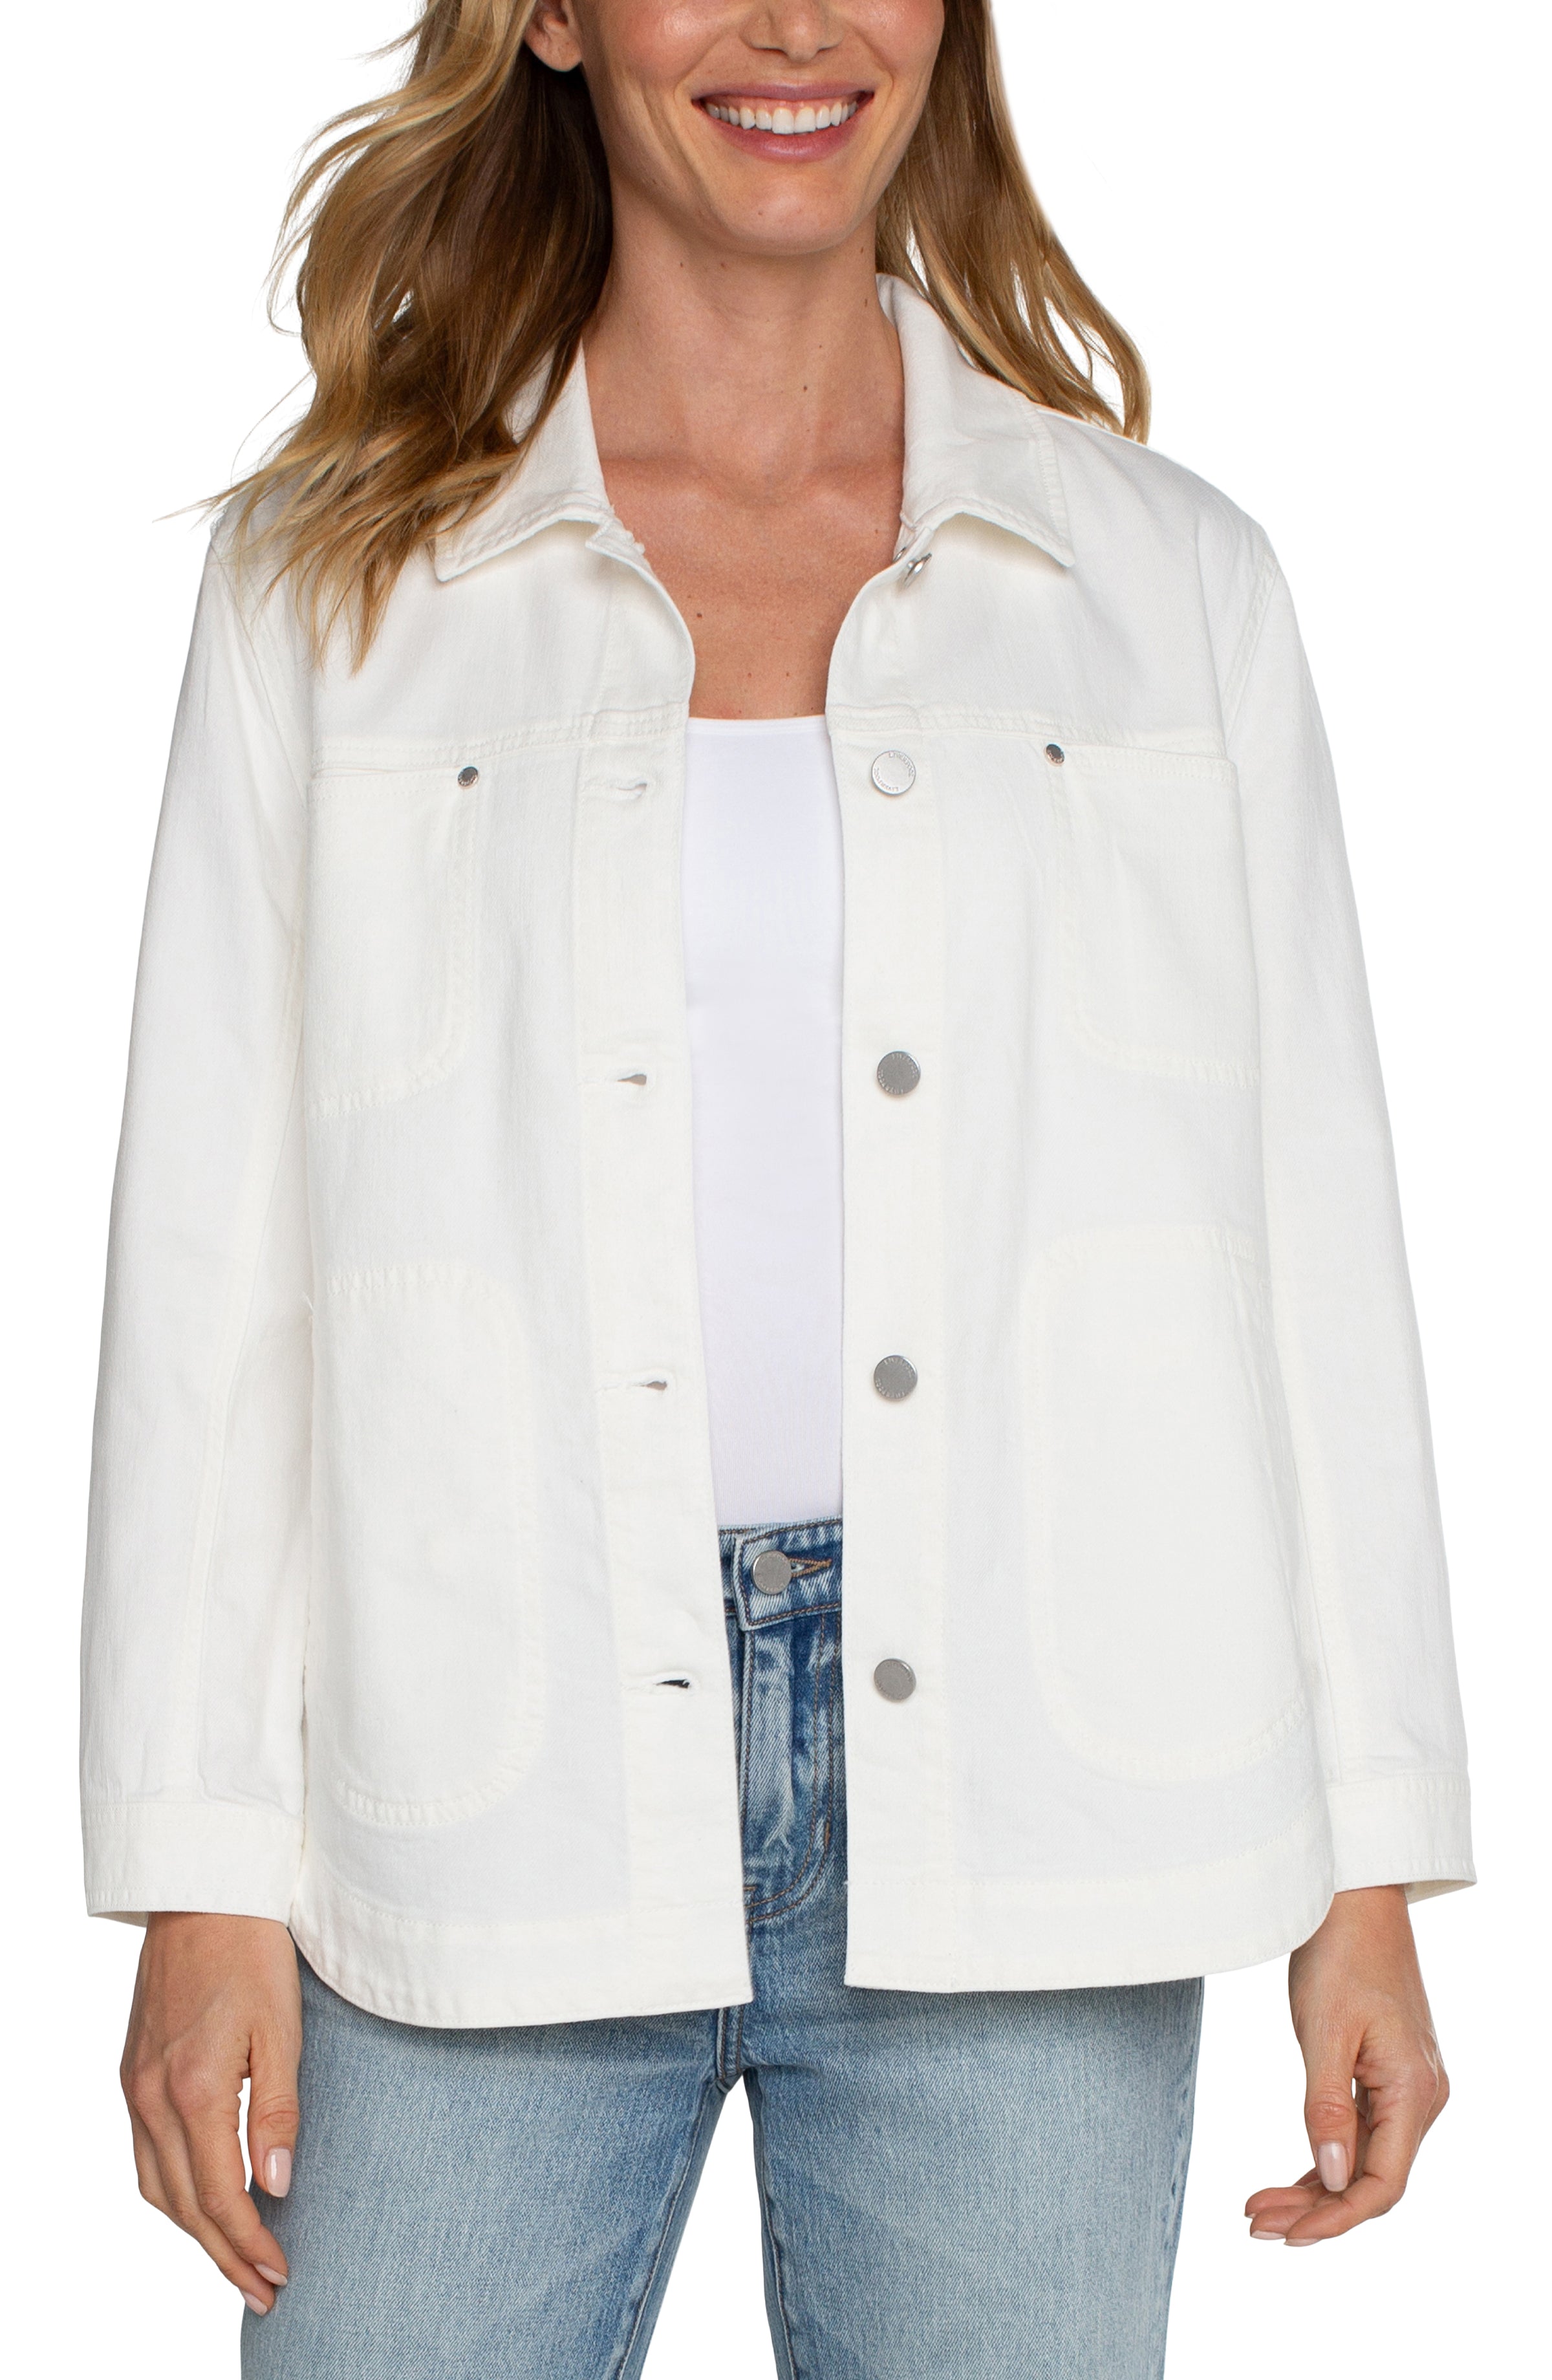 LVP Casual Jacket - Bright White Front View